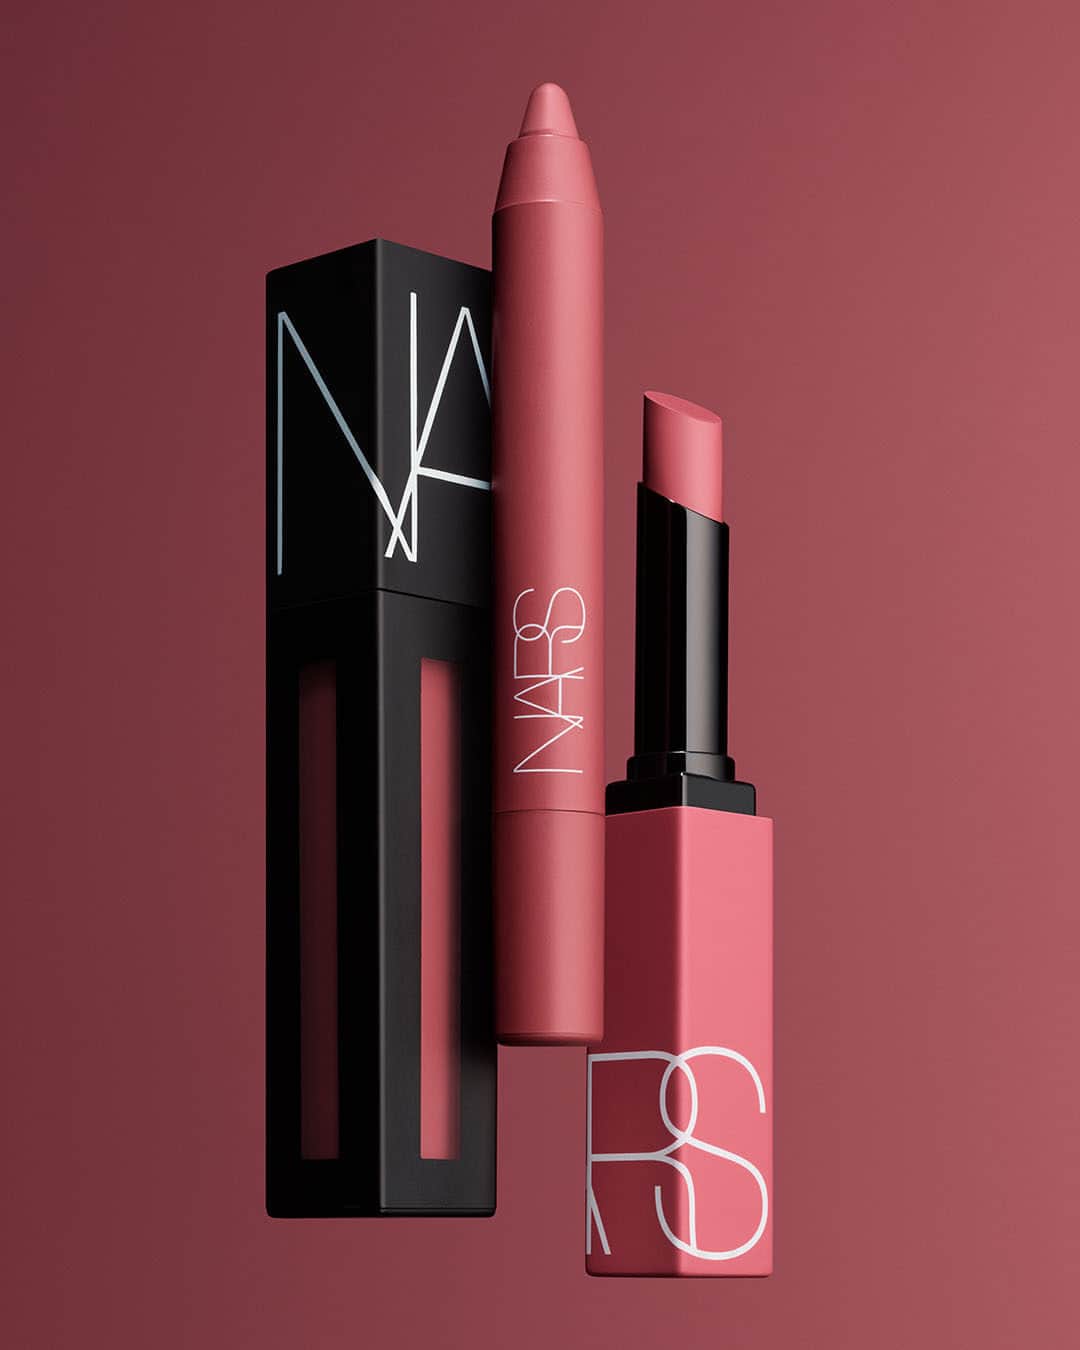 NARSのインスタグラム：「Coveted shade. Three ways. Pick your favorite formula of American Woman from the Powermatte lineup.  Powermatte Lipstick High-intensity, slim-line lipstick glides on bold color with 10-hour wear in just one swipe.  Powermatte Lip Pigment Highly pigmented liquid lipstick applies like an ink for lasting, comfortable matte color.  Powermatte High-Intensity Lip Pencil Bold matte pencil saturates lips in precise, transfer-proof pigment with 12-hour staying power.」